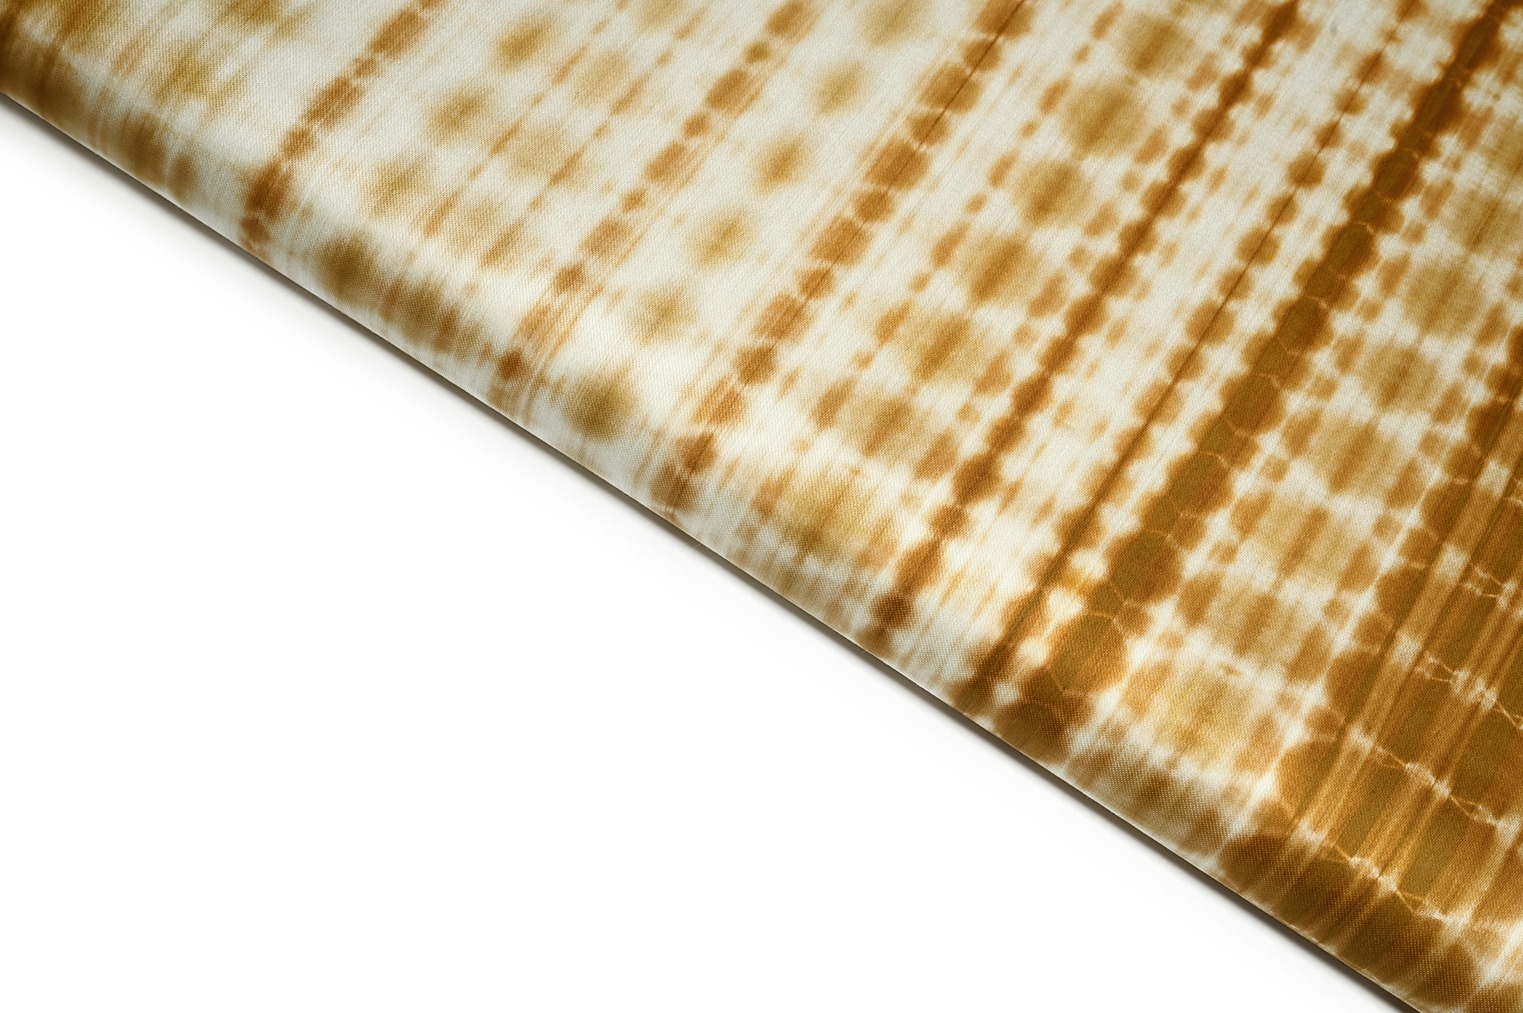 OFF WHITE & CAMEL BROWN COLOR ABSTRACT TIE &DIE SHIBORI PATTERN COTTON SHATIN PRINT FABRIC 10545